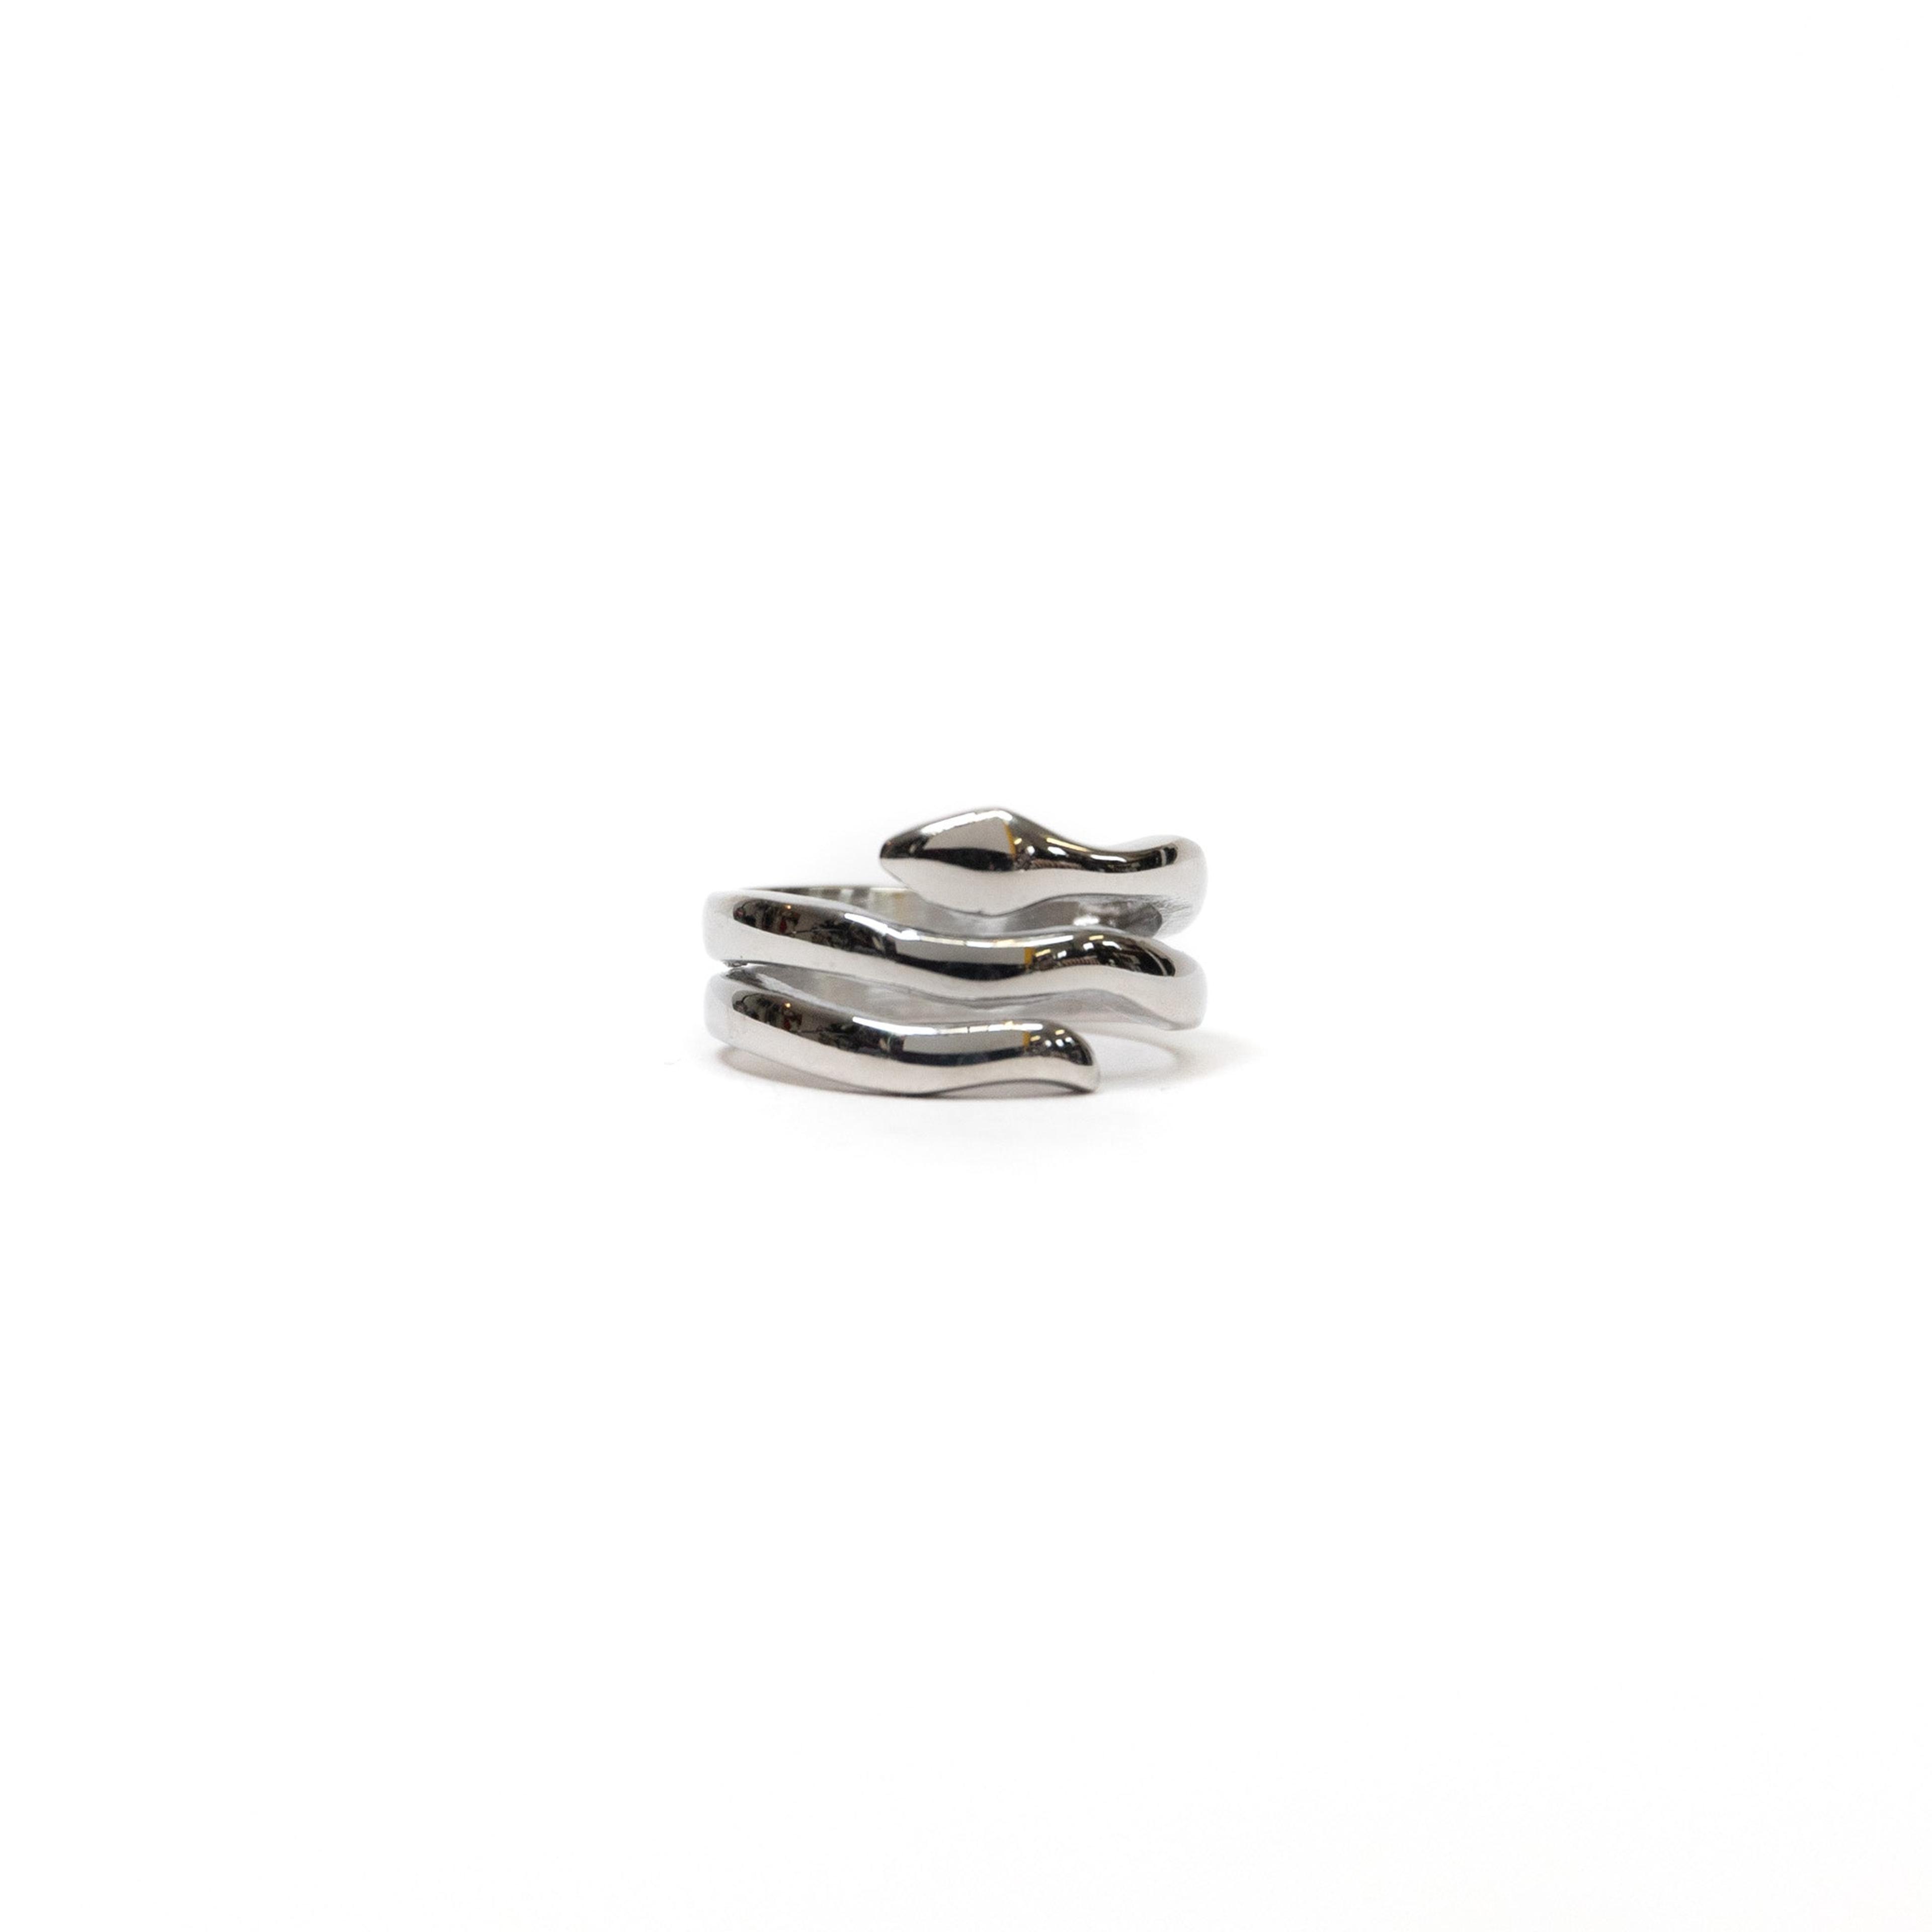 The Snake Wrap Ring